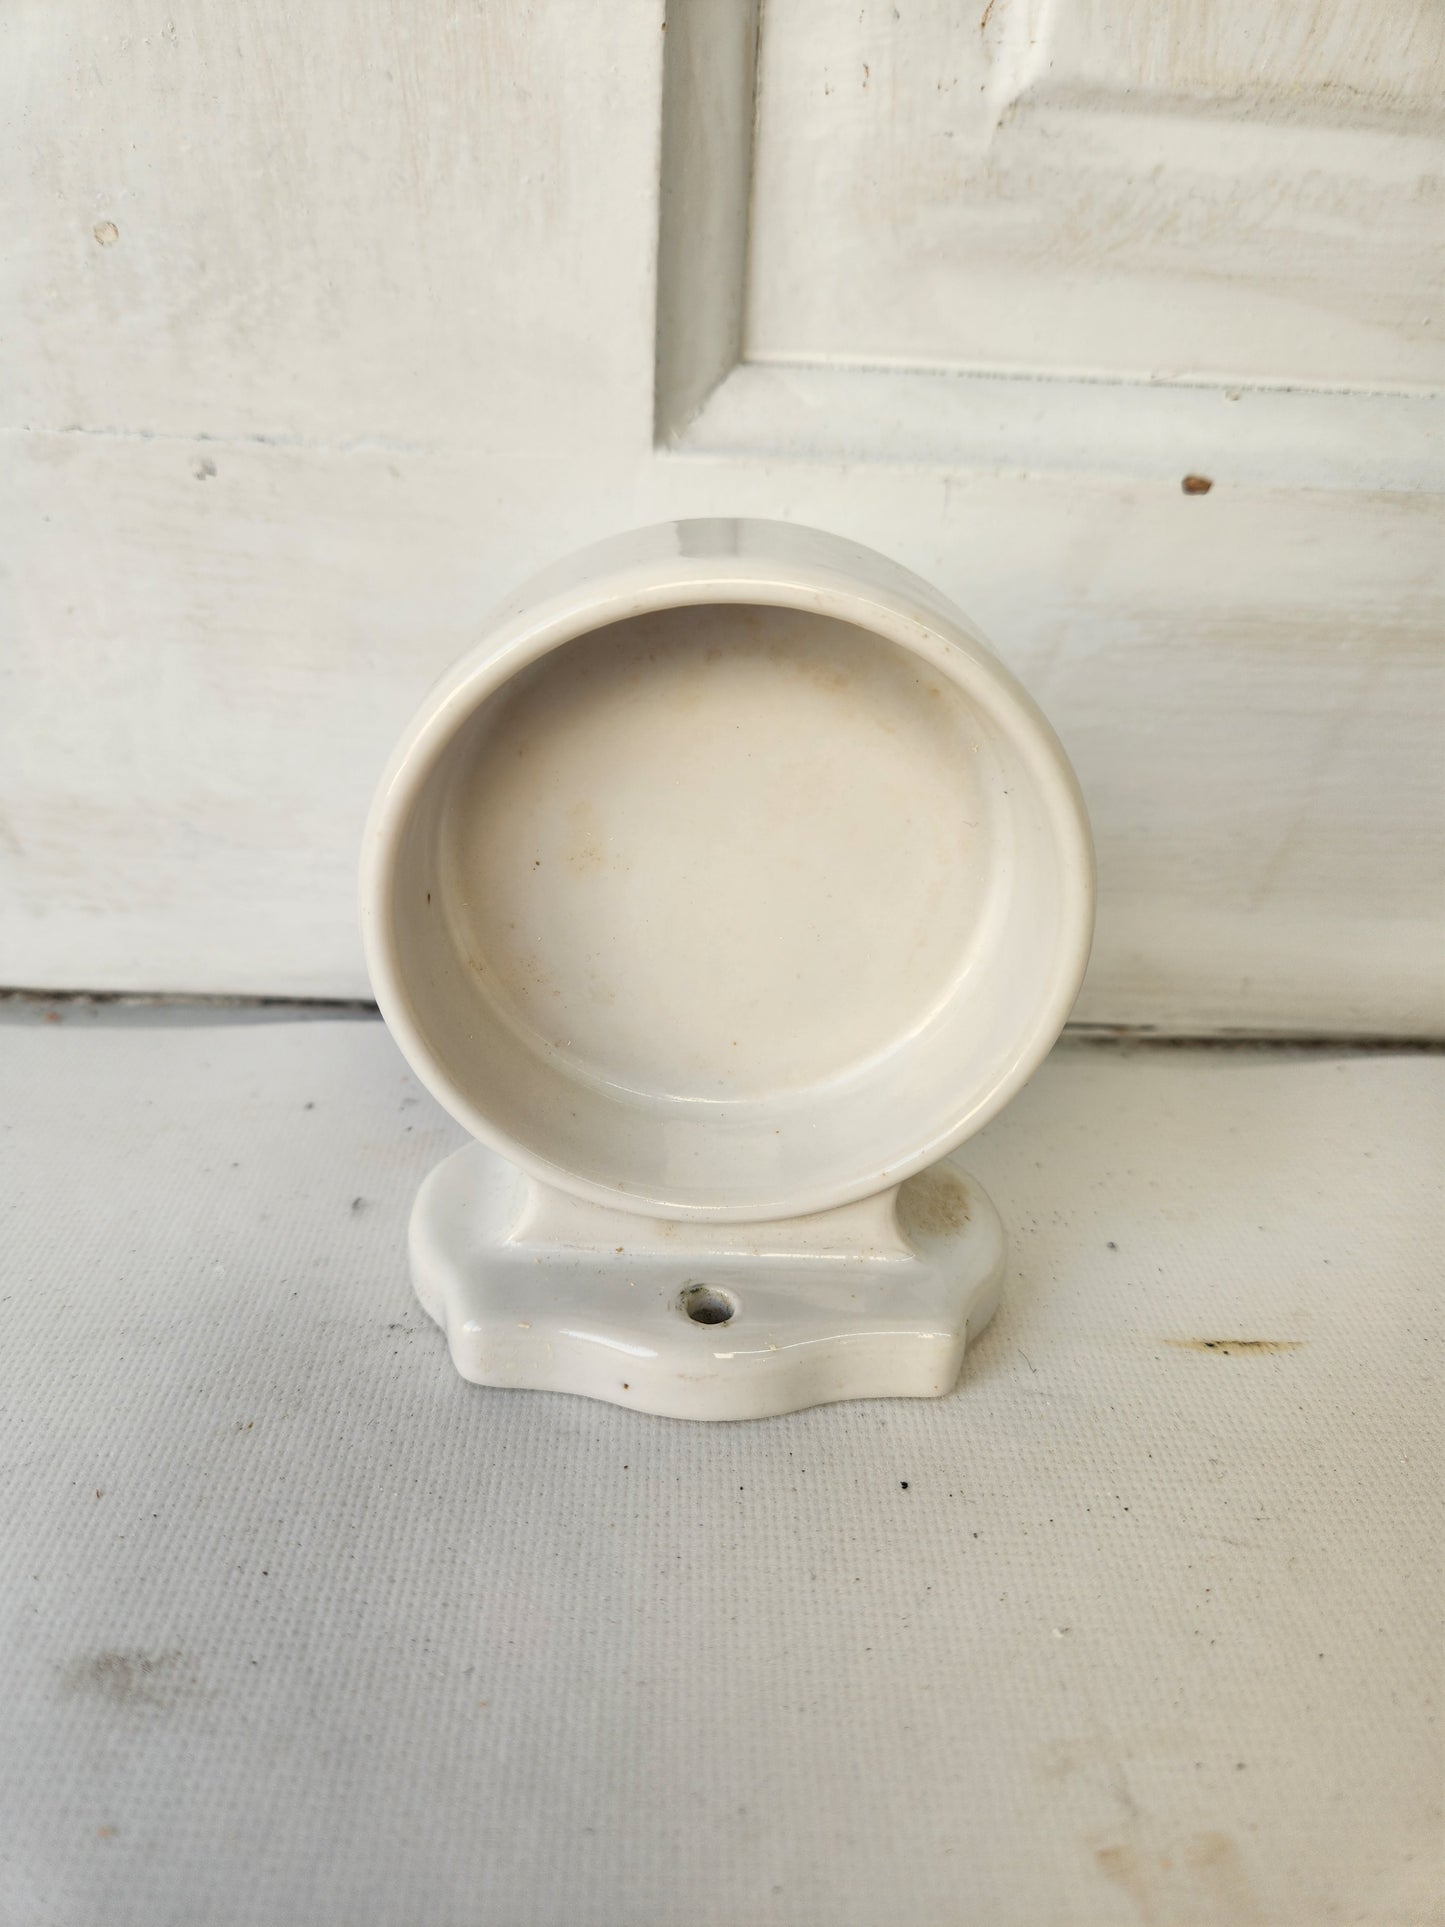 White Porcelain Bathroom Cup Holder or Soap Dish, 1930s Era Wall Mount Ceramic Cup Holder 113002